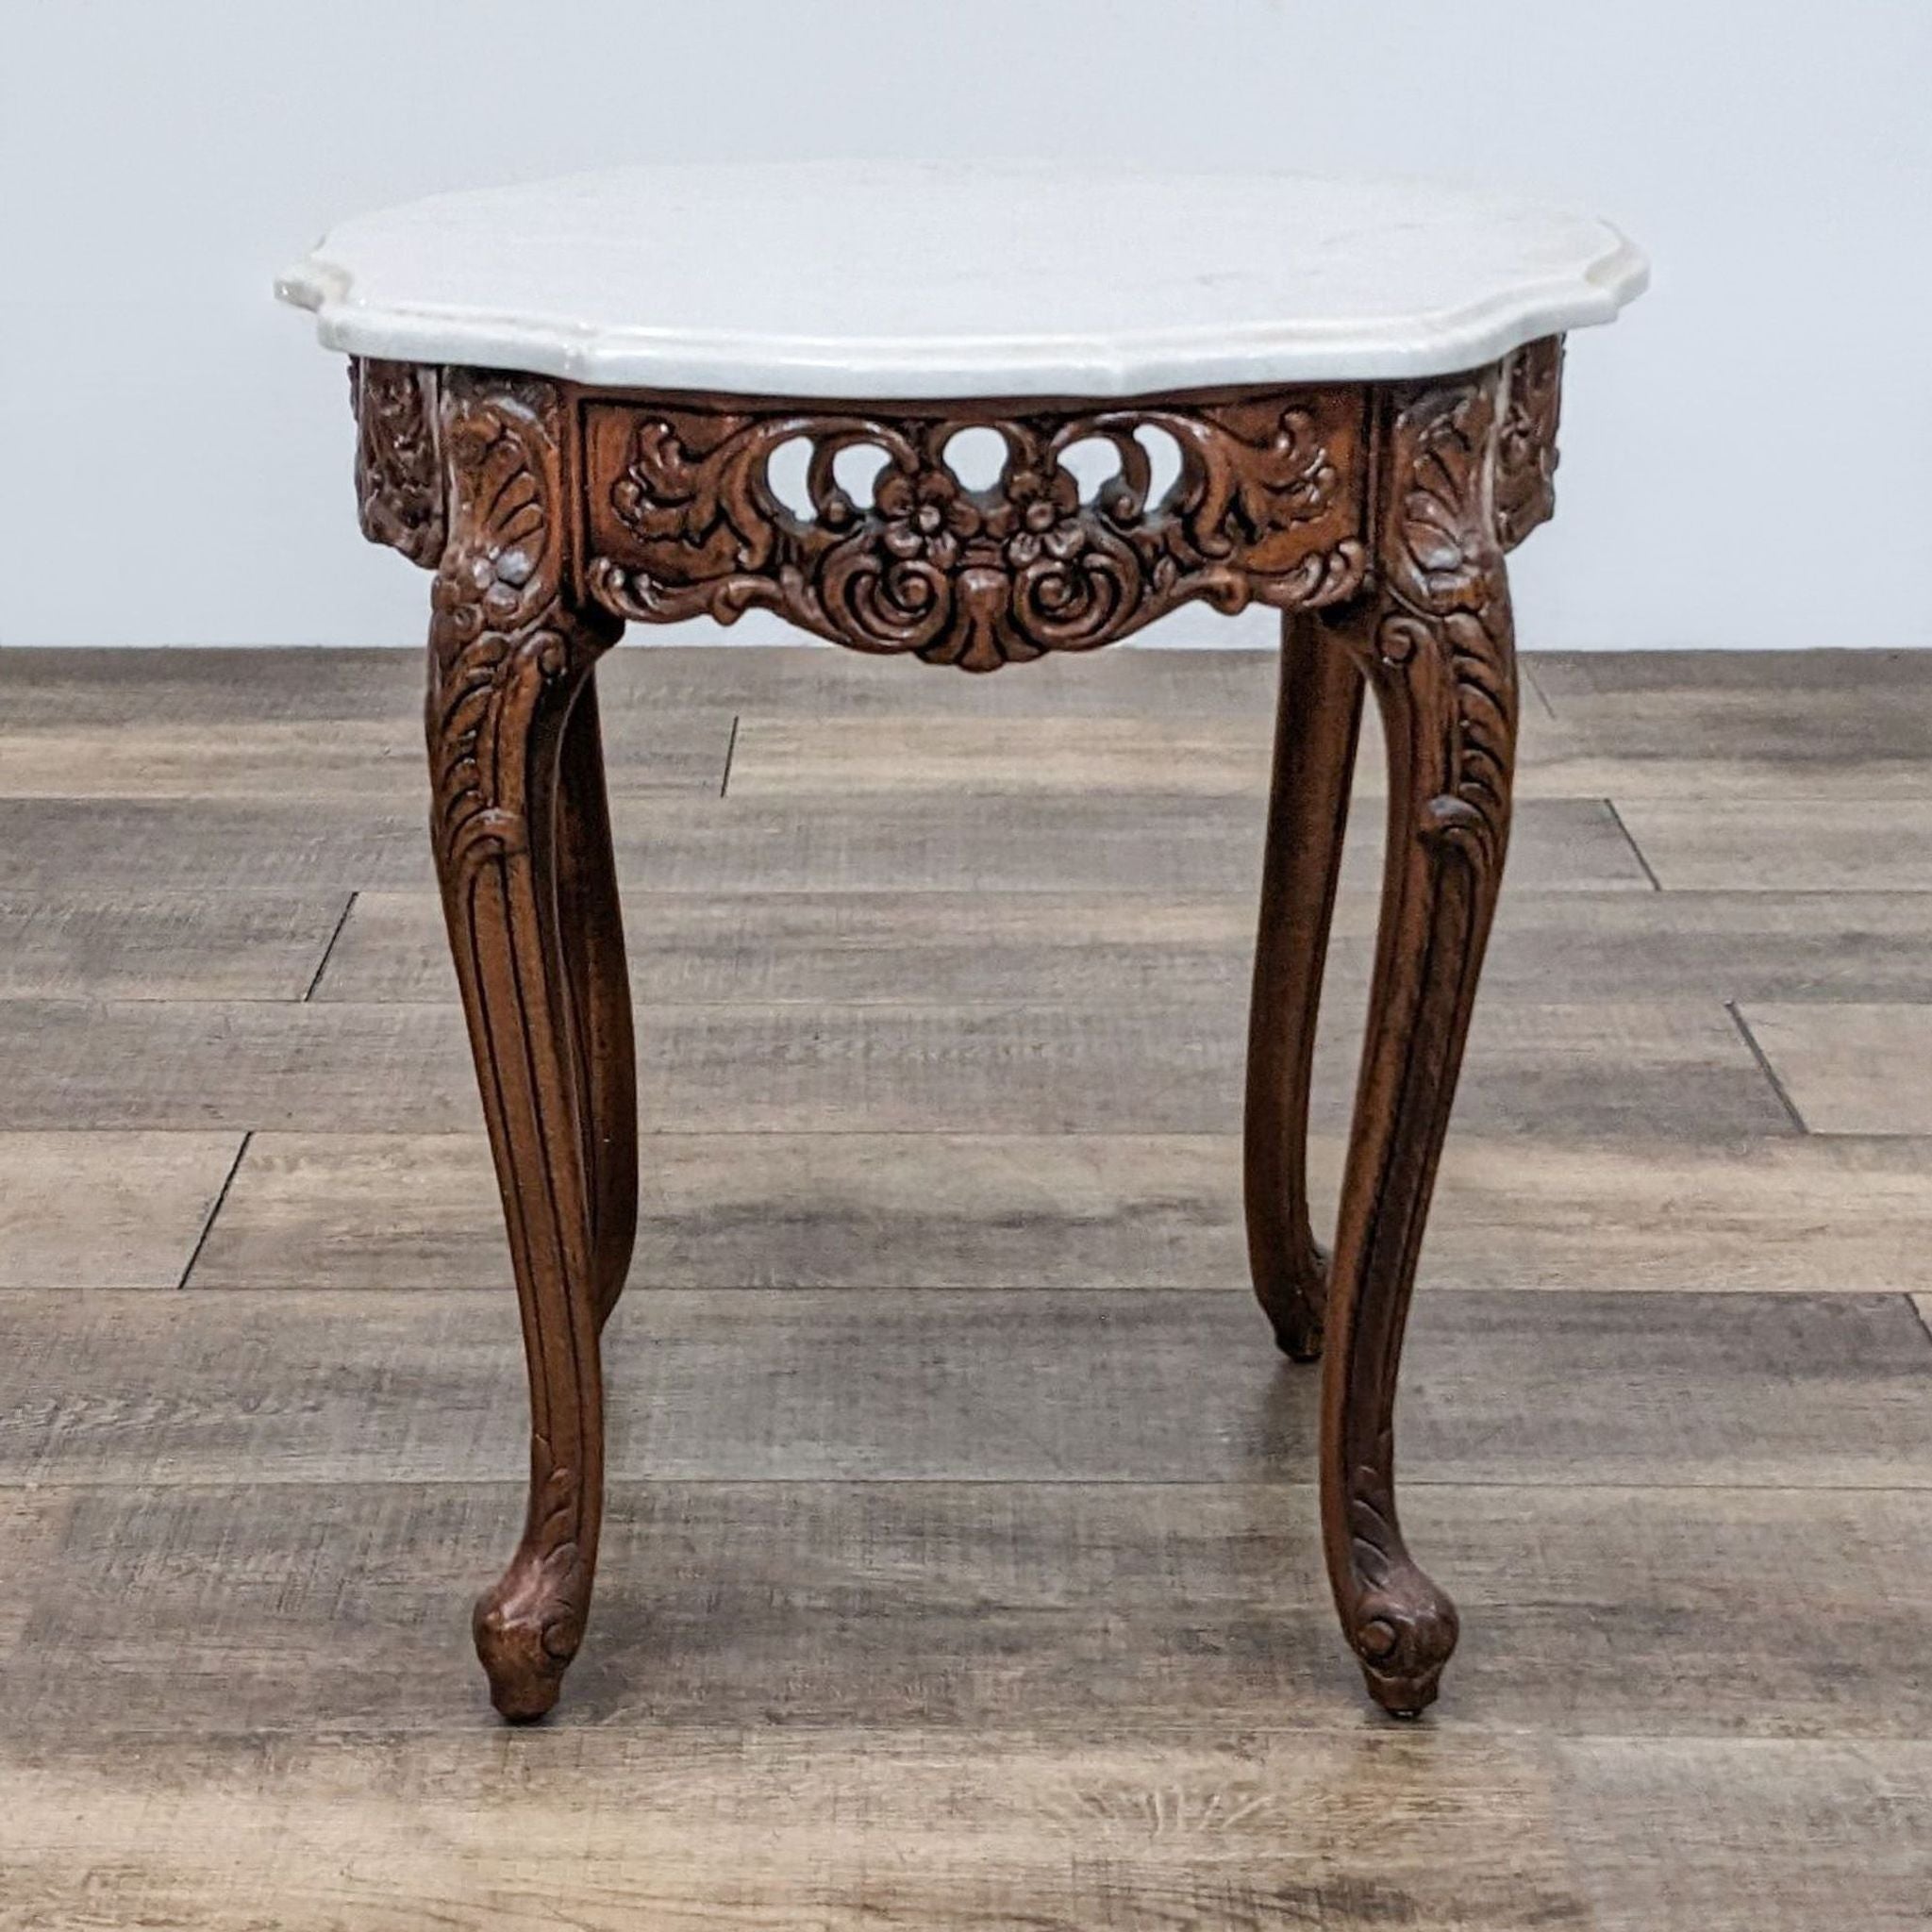 Image 1: Reperch end table with a scalloped marble top and detailed wooden cabriole legs.